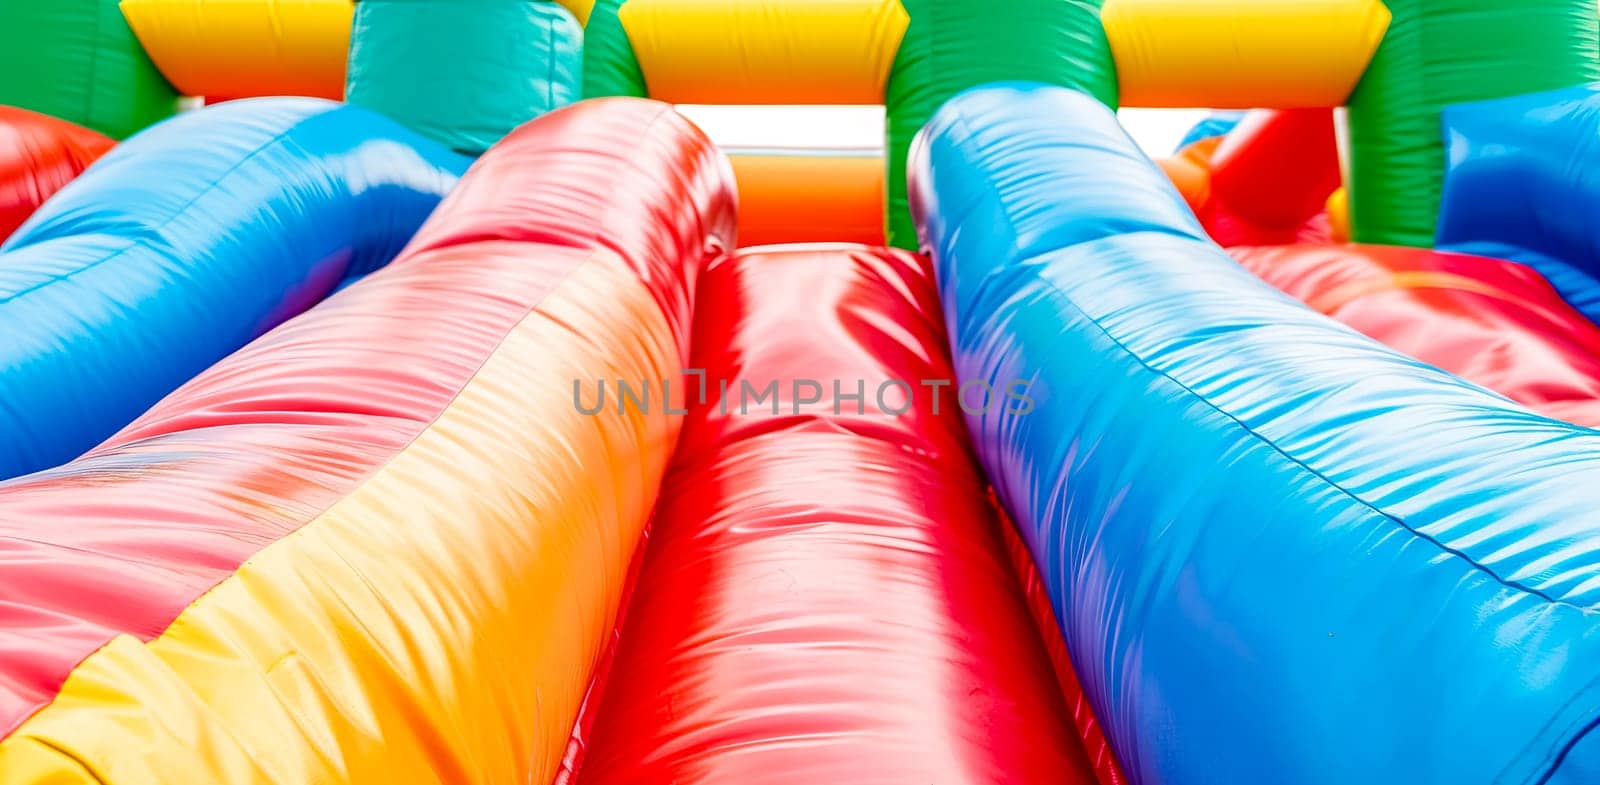 Colorful Inflatable Playground Structure for Kids' Entertainment and Outdoor Fun by Edophoto